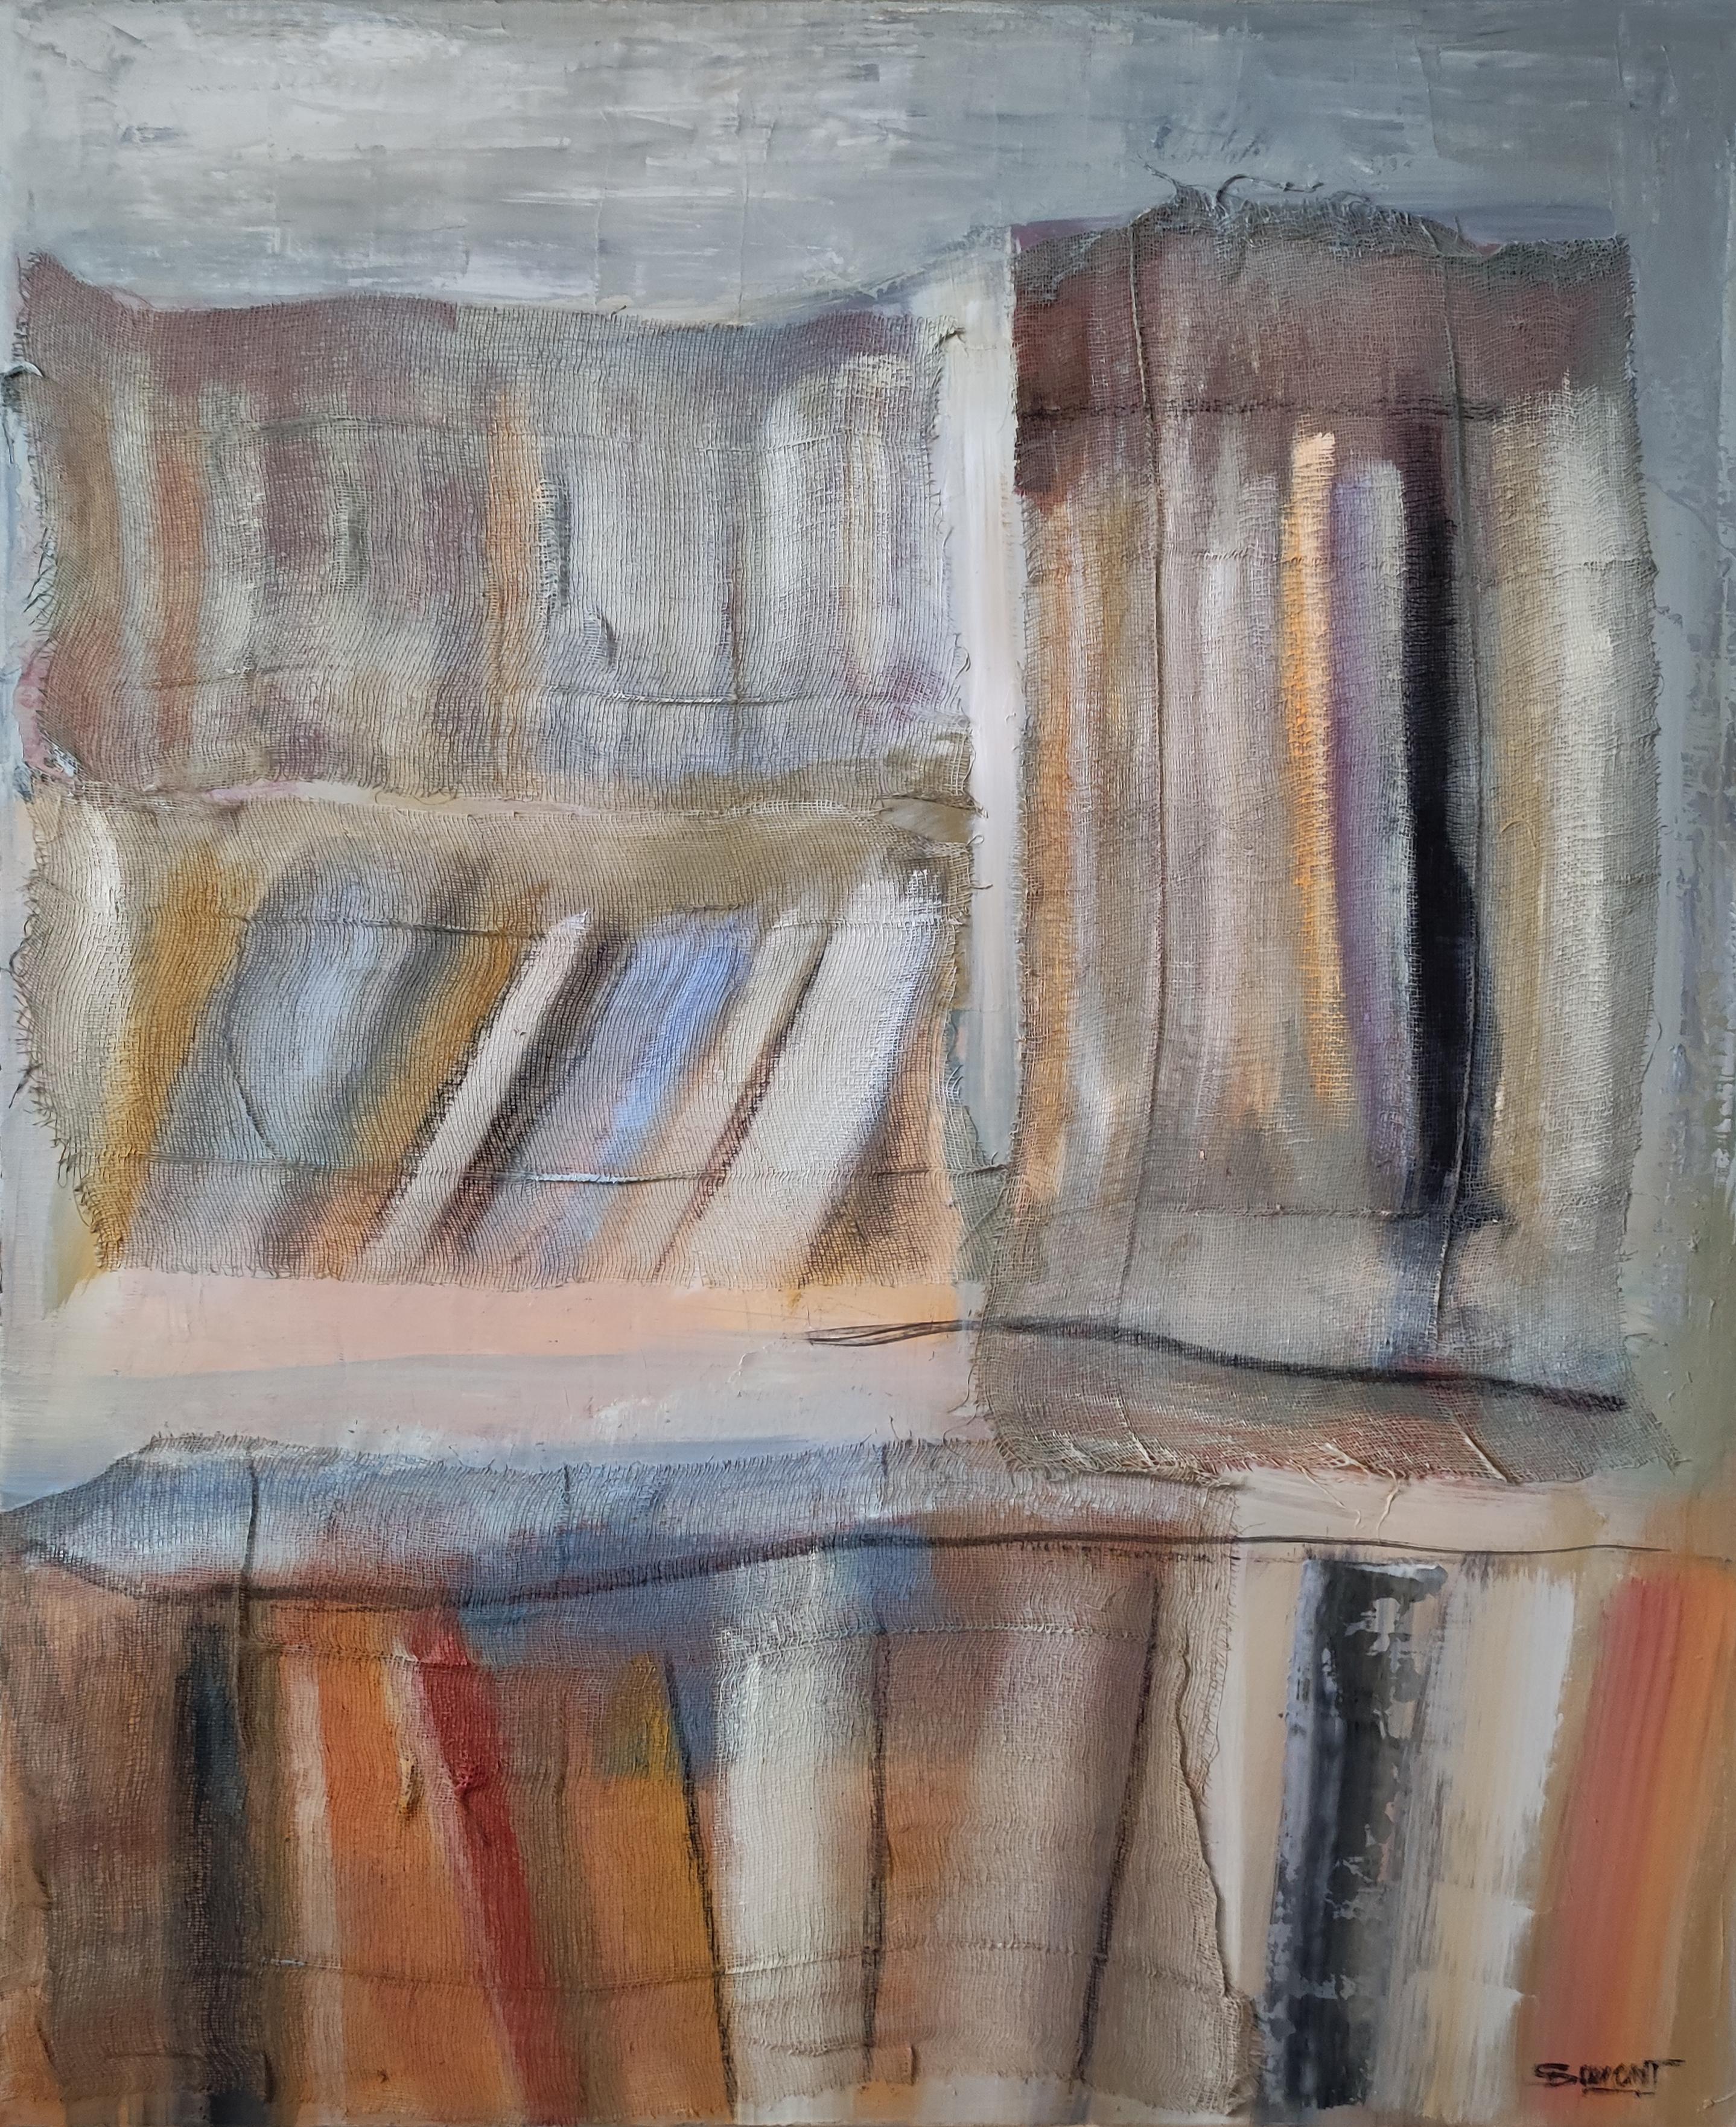 library 8, abstract, collage, books, oil on canvas, minimalism, expressionism - Painting by SOPHIE DUMONT